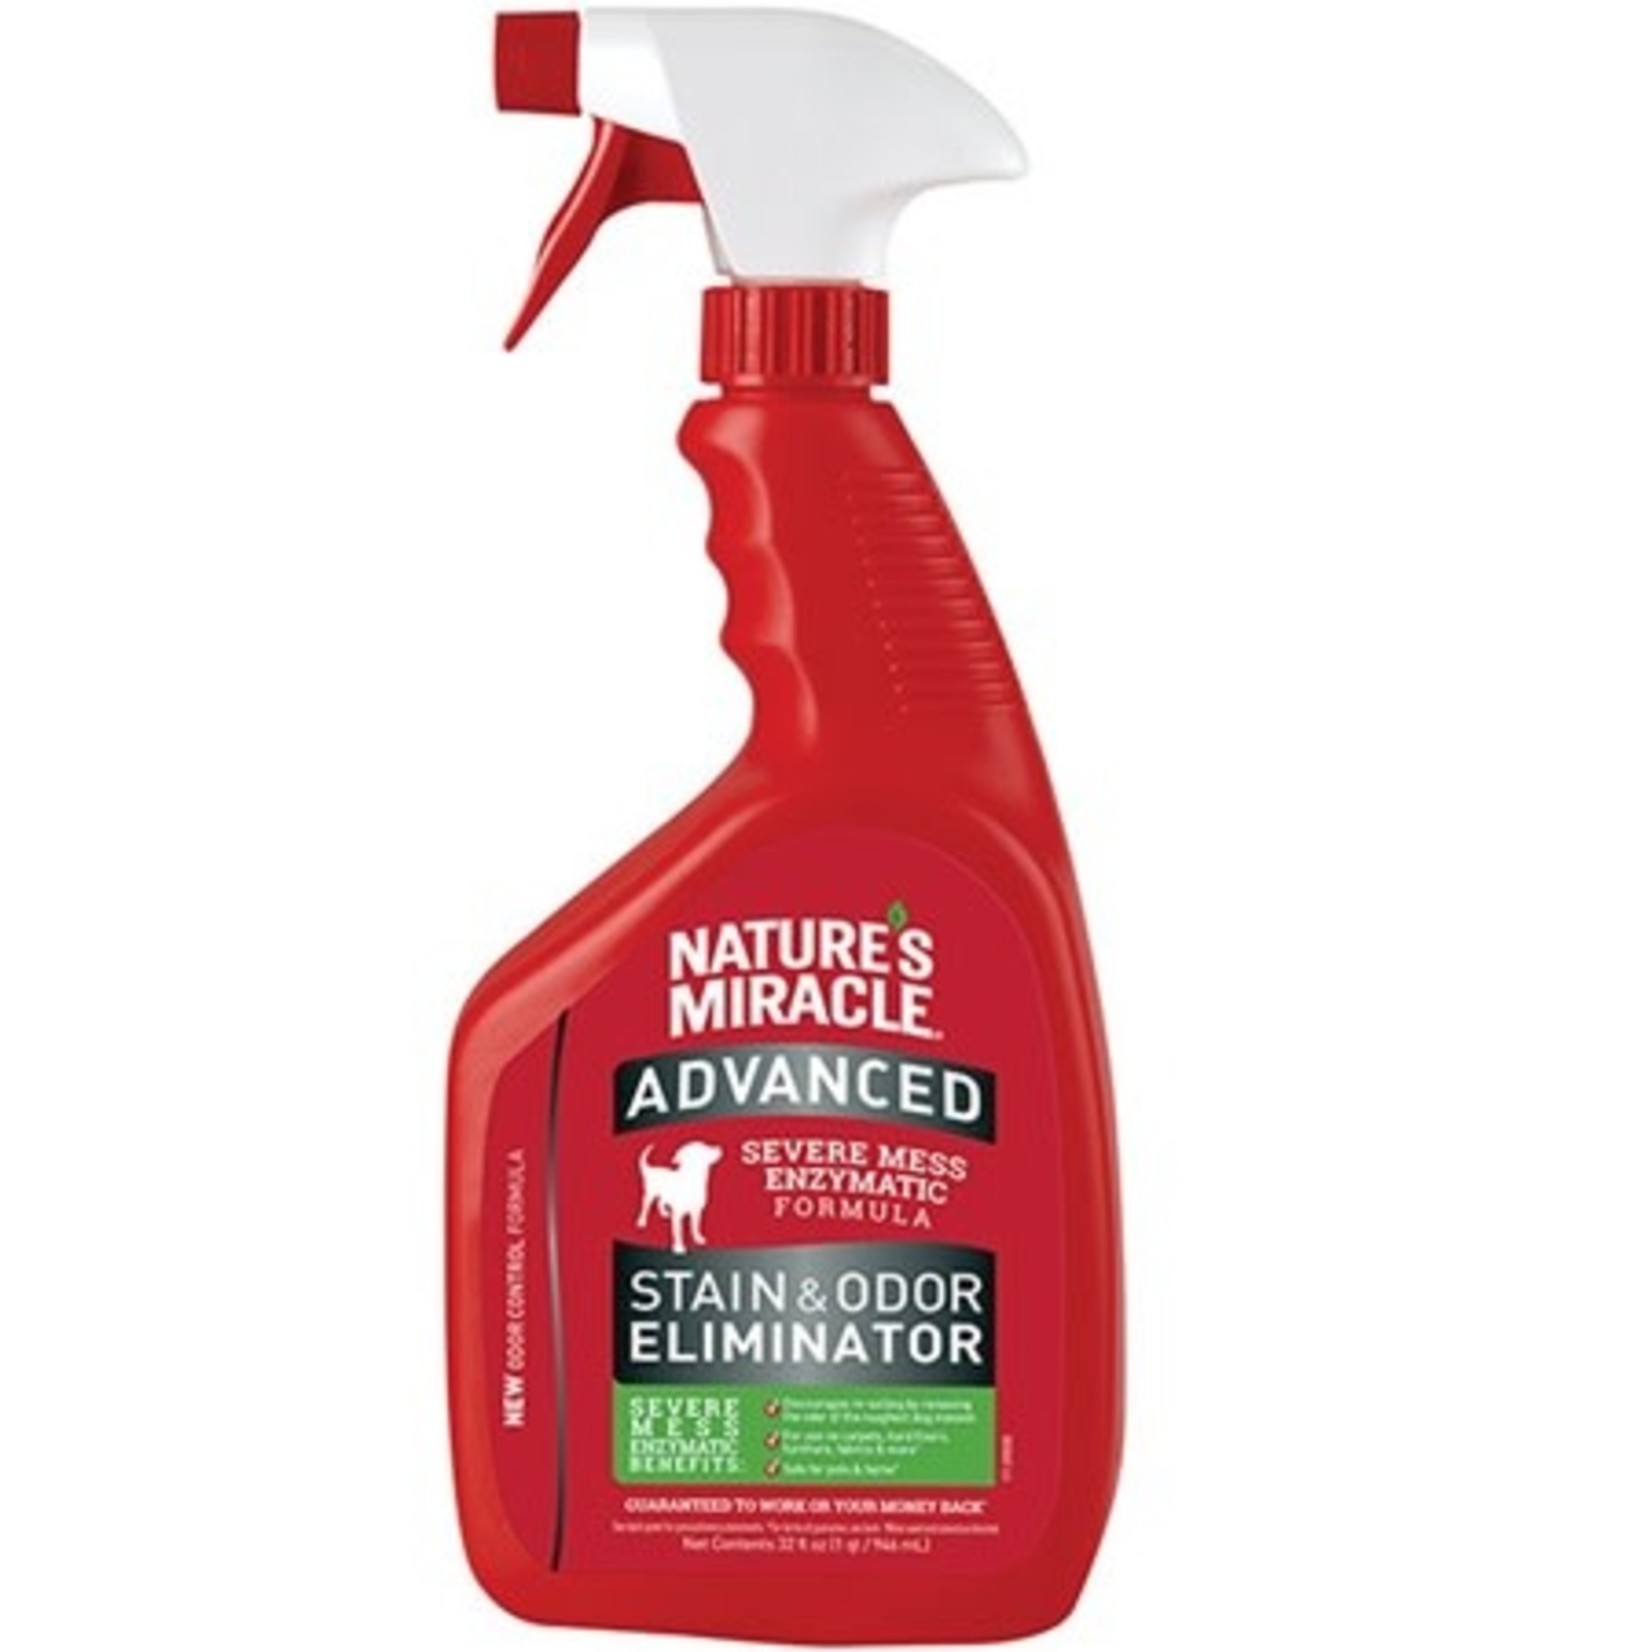 Nature's Miracle Nature’s Miracle: Advanced Stain Remover 32 fl oz